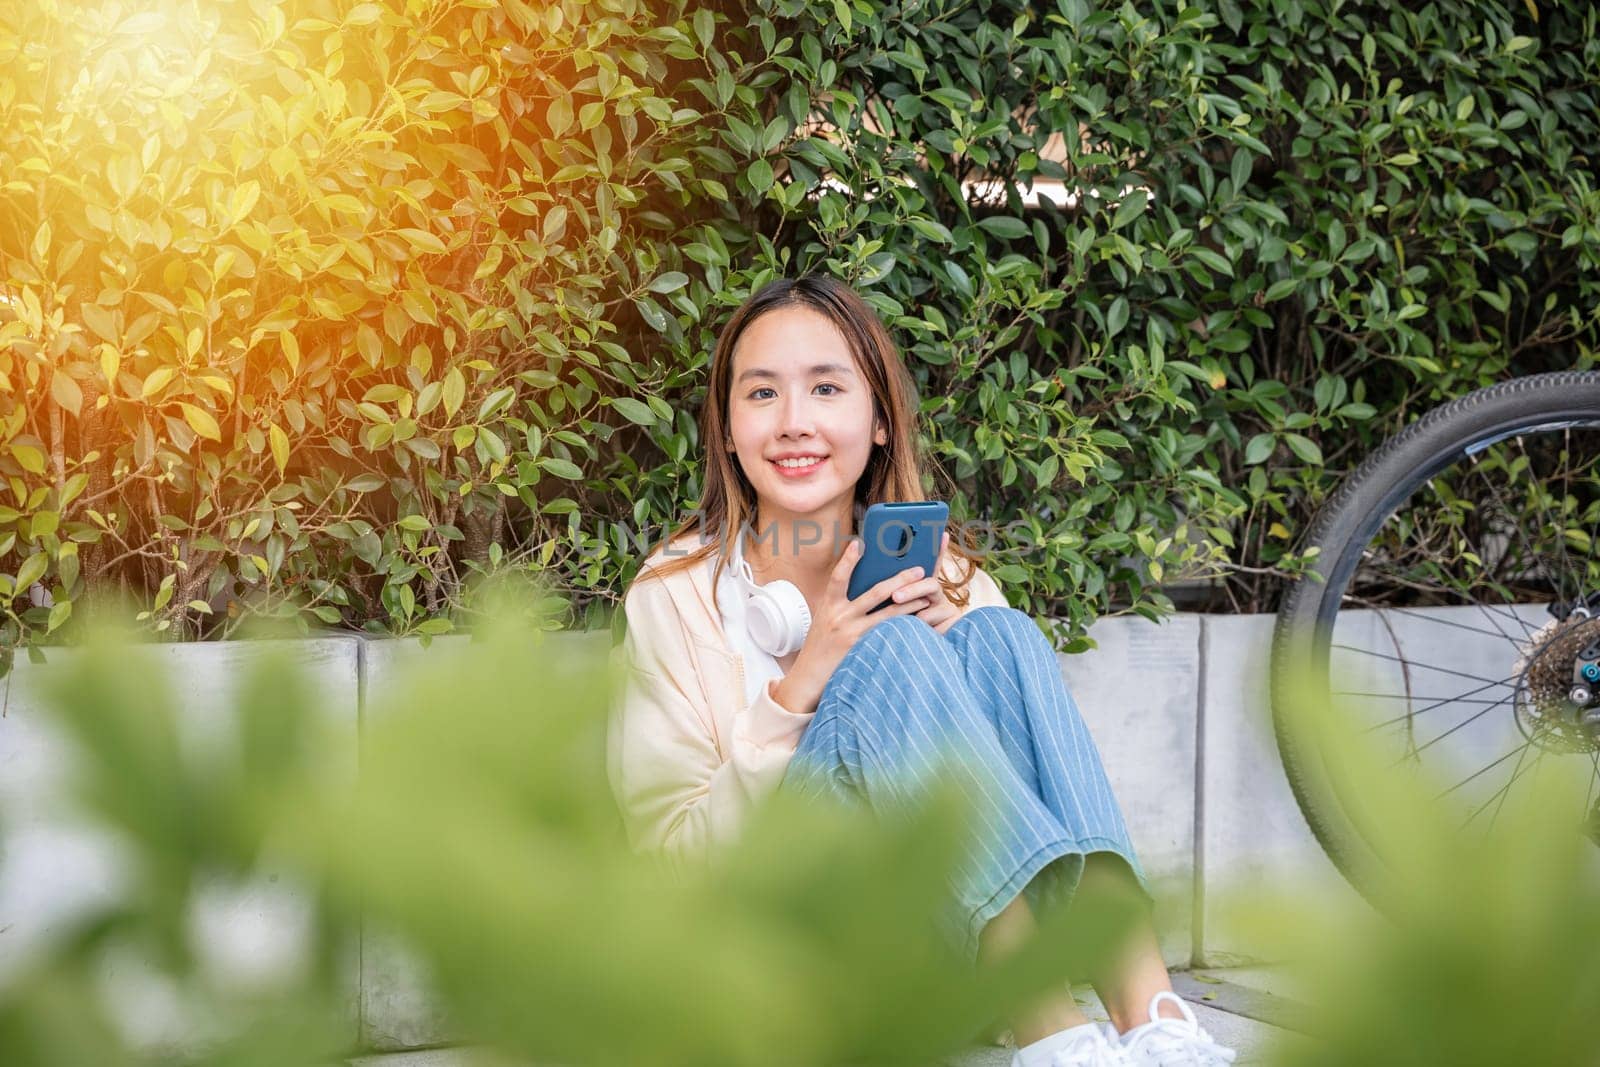 Beautiful spring day cute young woman sits in park with her bicycle listening to music through earphones and typing joyful message on her mobile phone. joyful expression reflects season happiness. by Sorapop